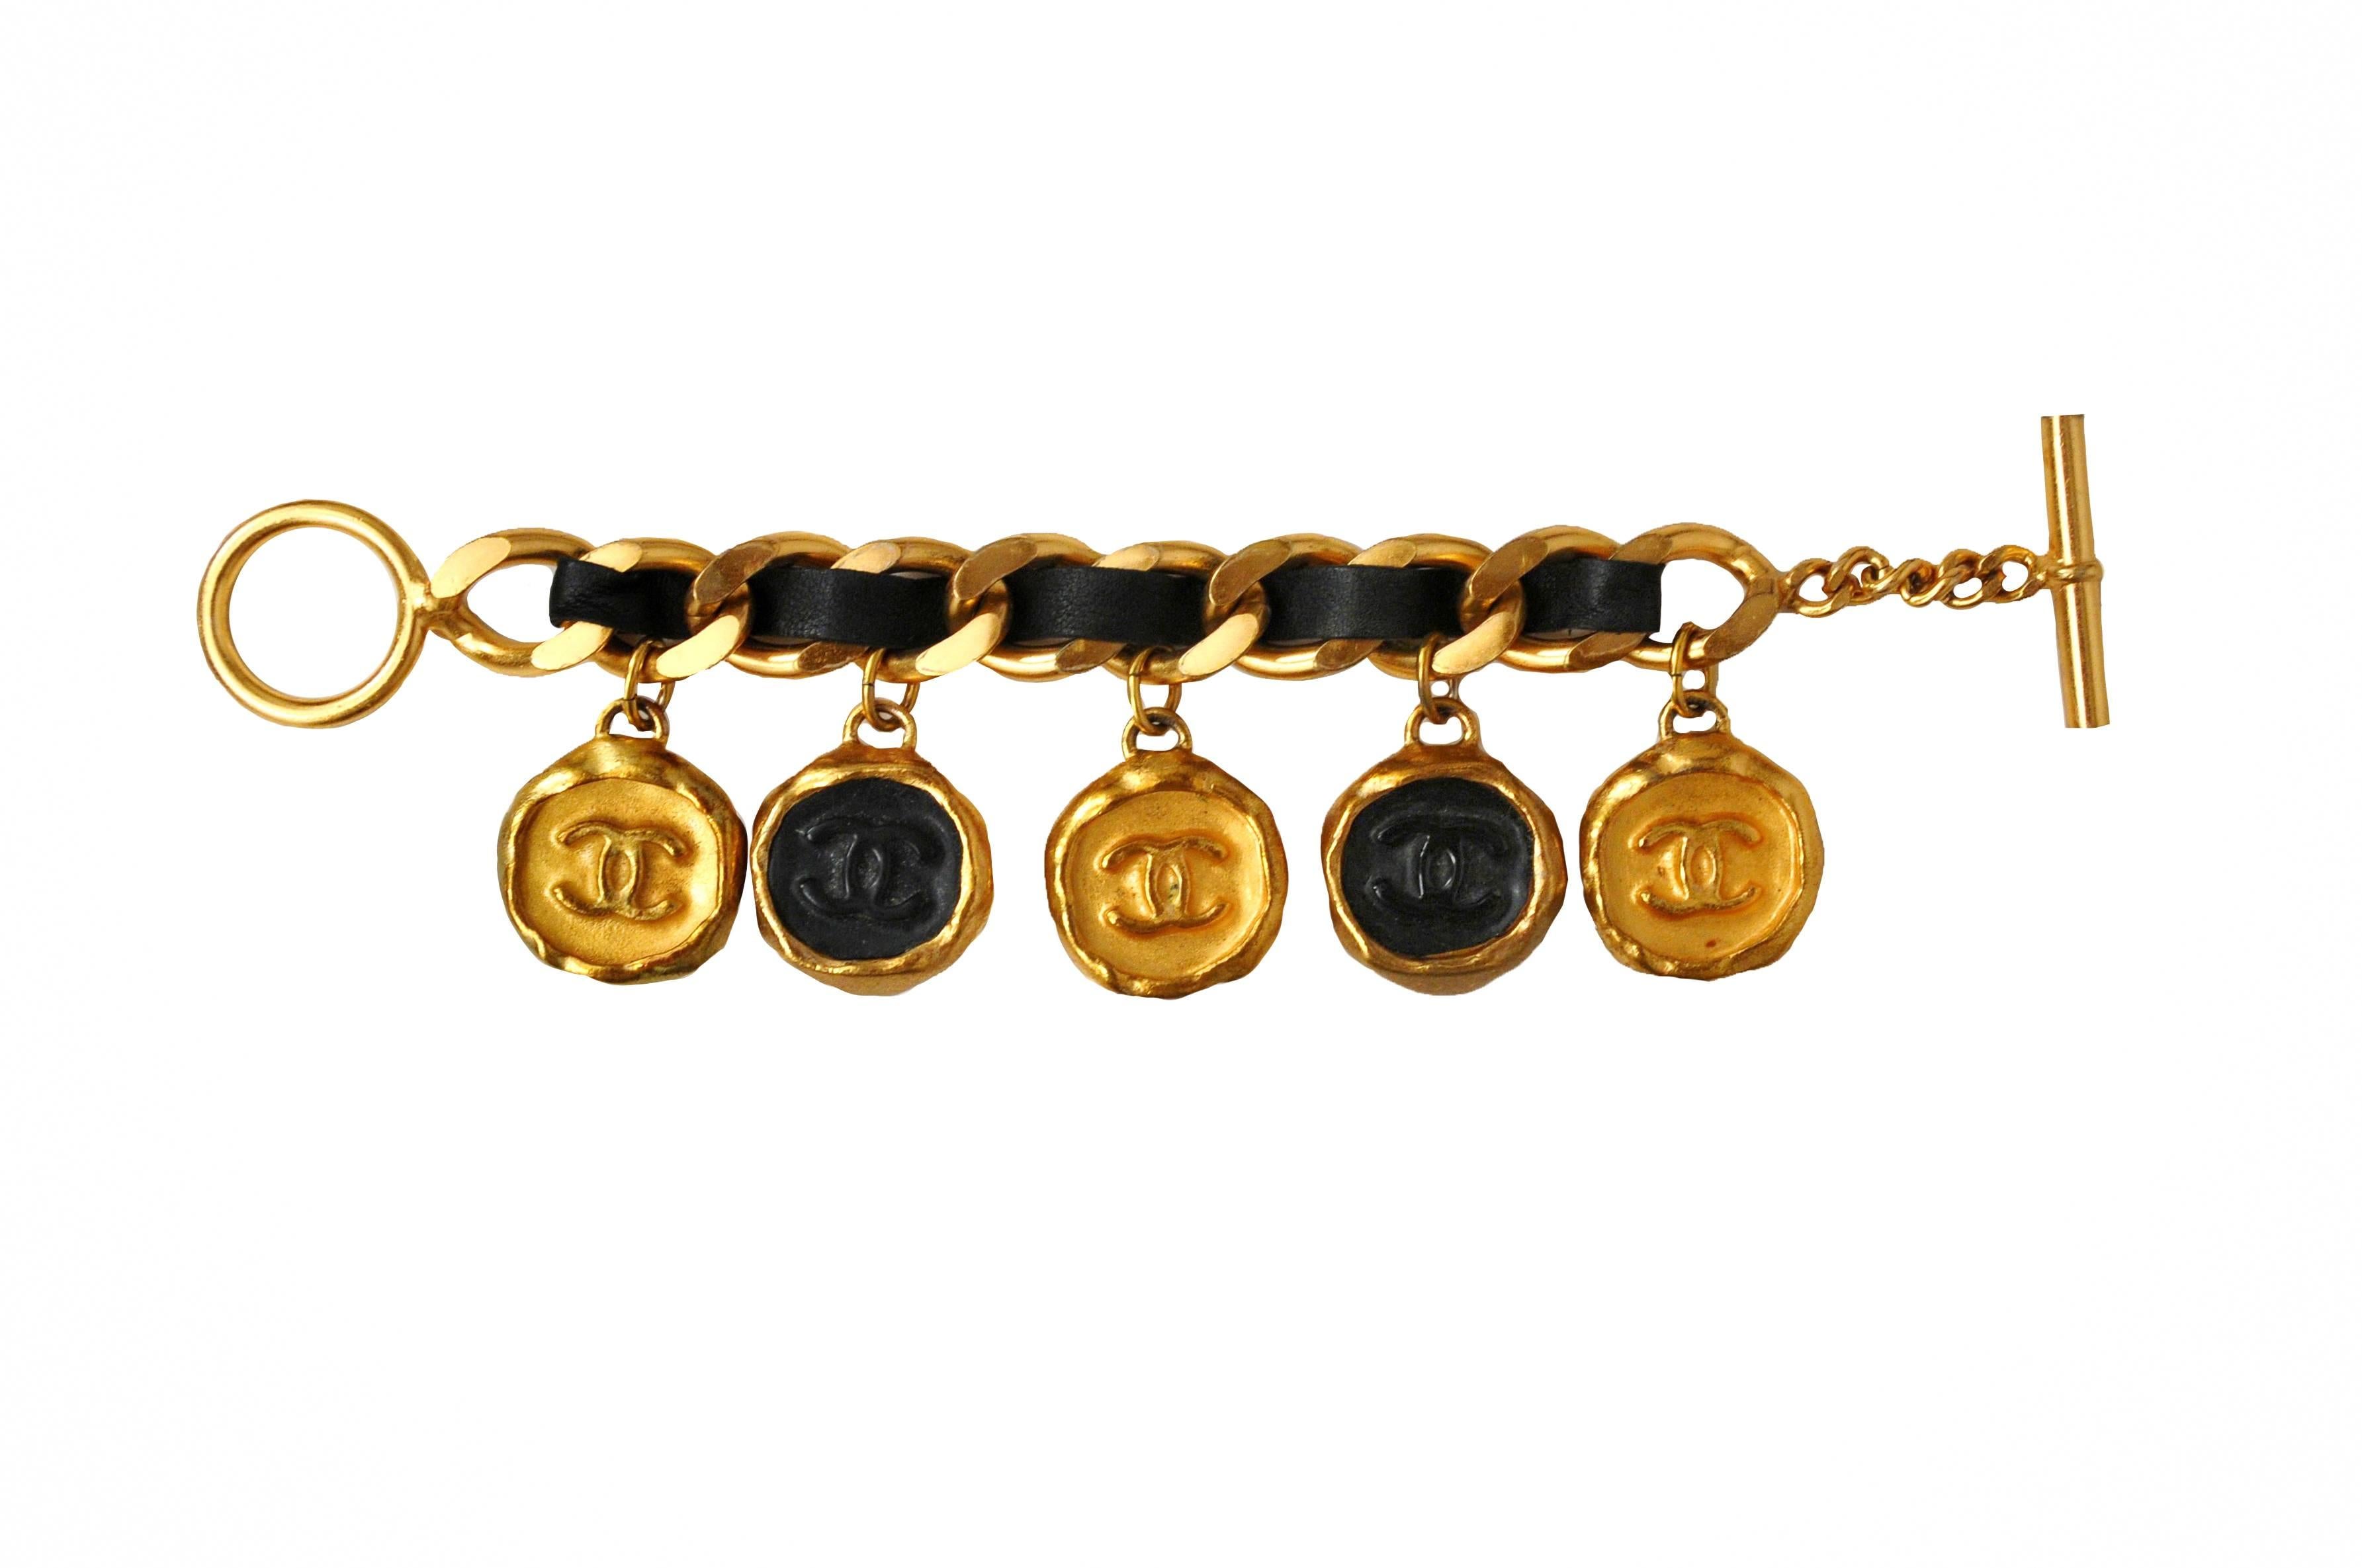 Vintage Chanel charm bracelet. Gold metal and black acrylic CC stamped charms on gold heavy chain with black leather woven throughout. Stamped Chanel on the toggle clasp. 